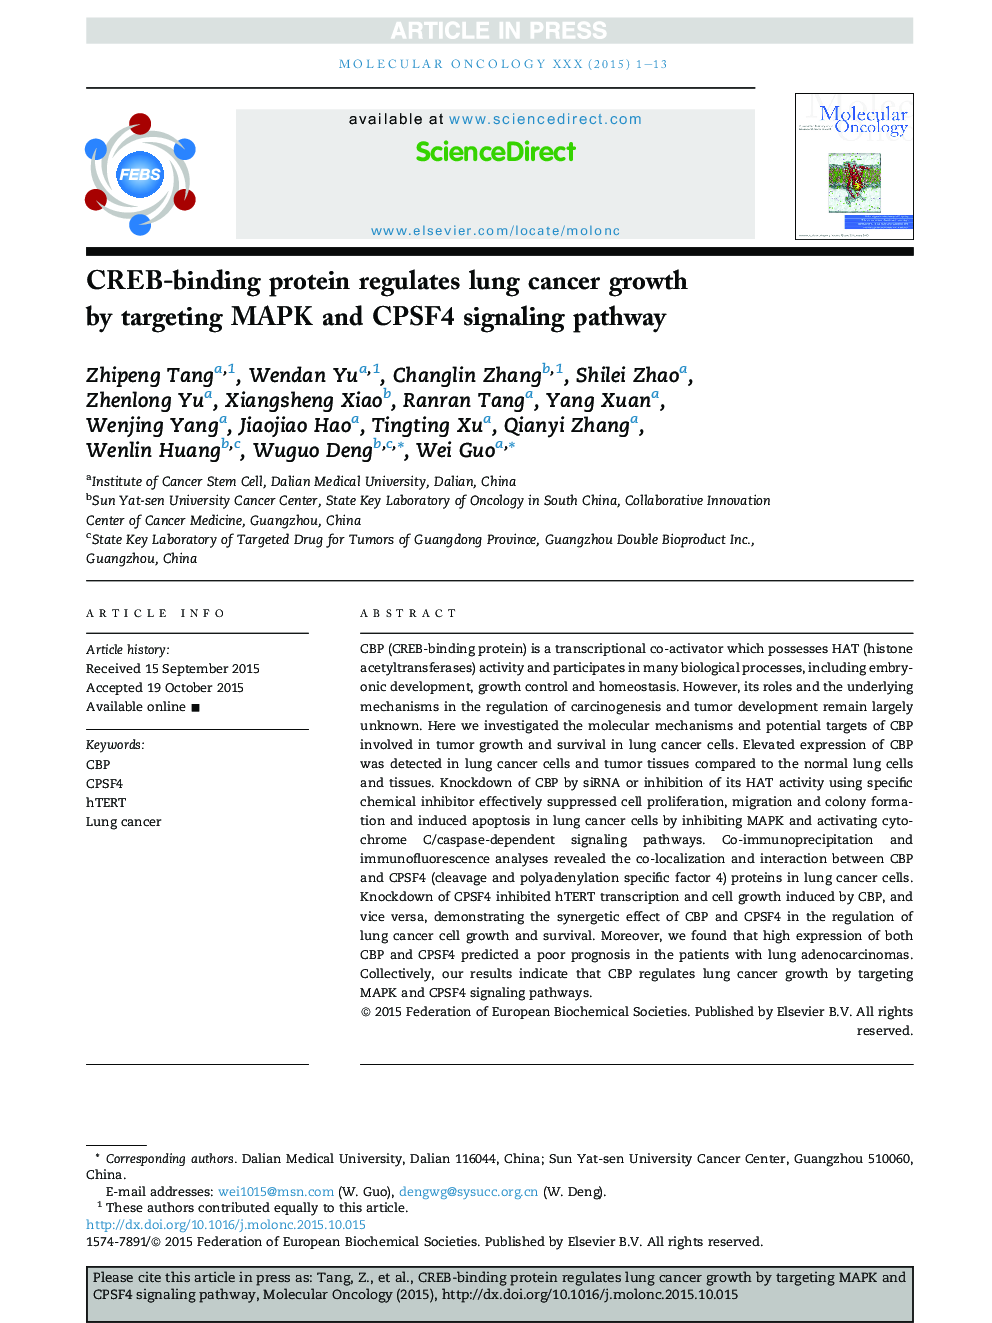 CREB-binding protein regulates lung cancer growth by targeting MAPK and CPSF4 signaling pathway